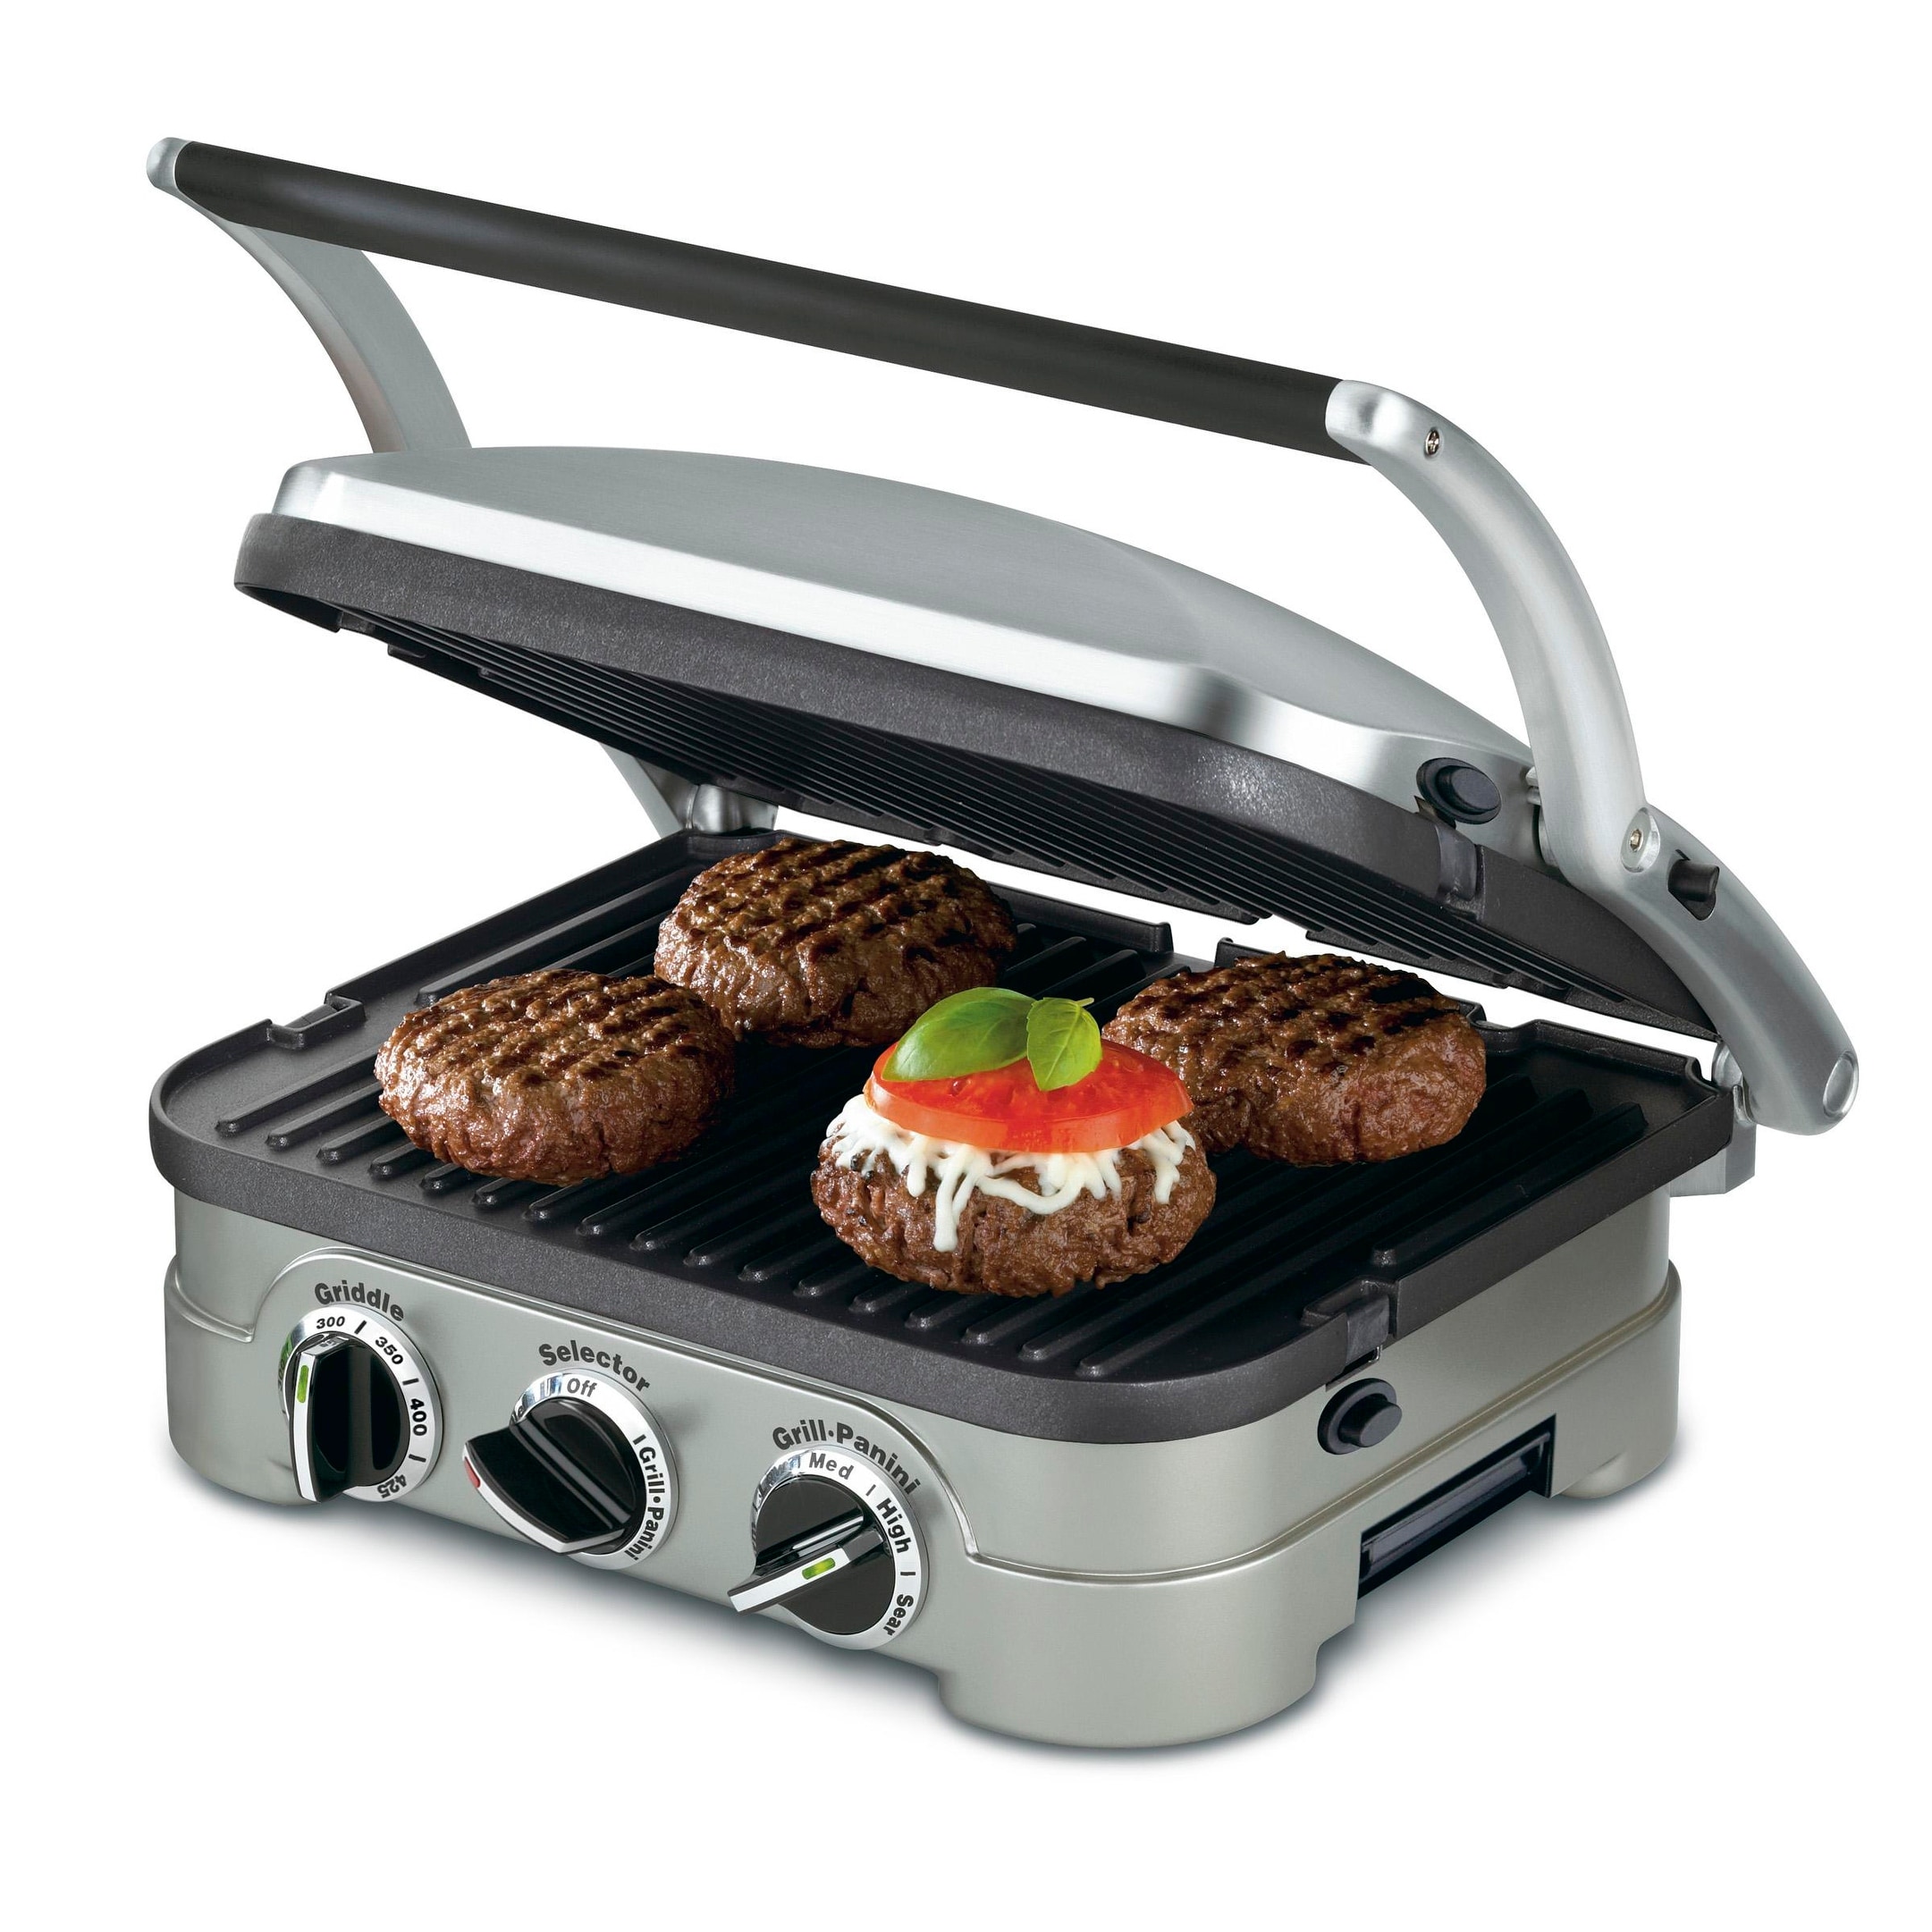 2-in-1 Nonstick Electric Griddle & Grill with Reversible Cooking Plate (1800w)